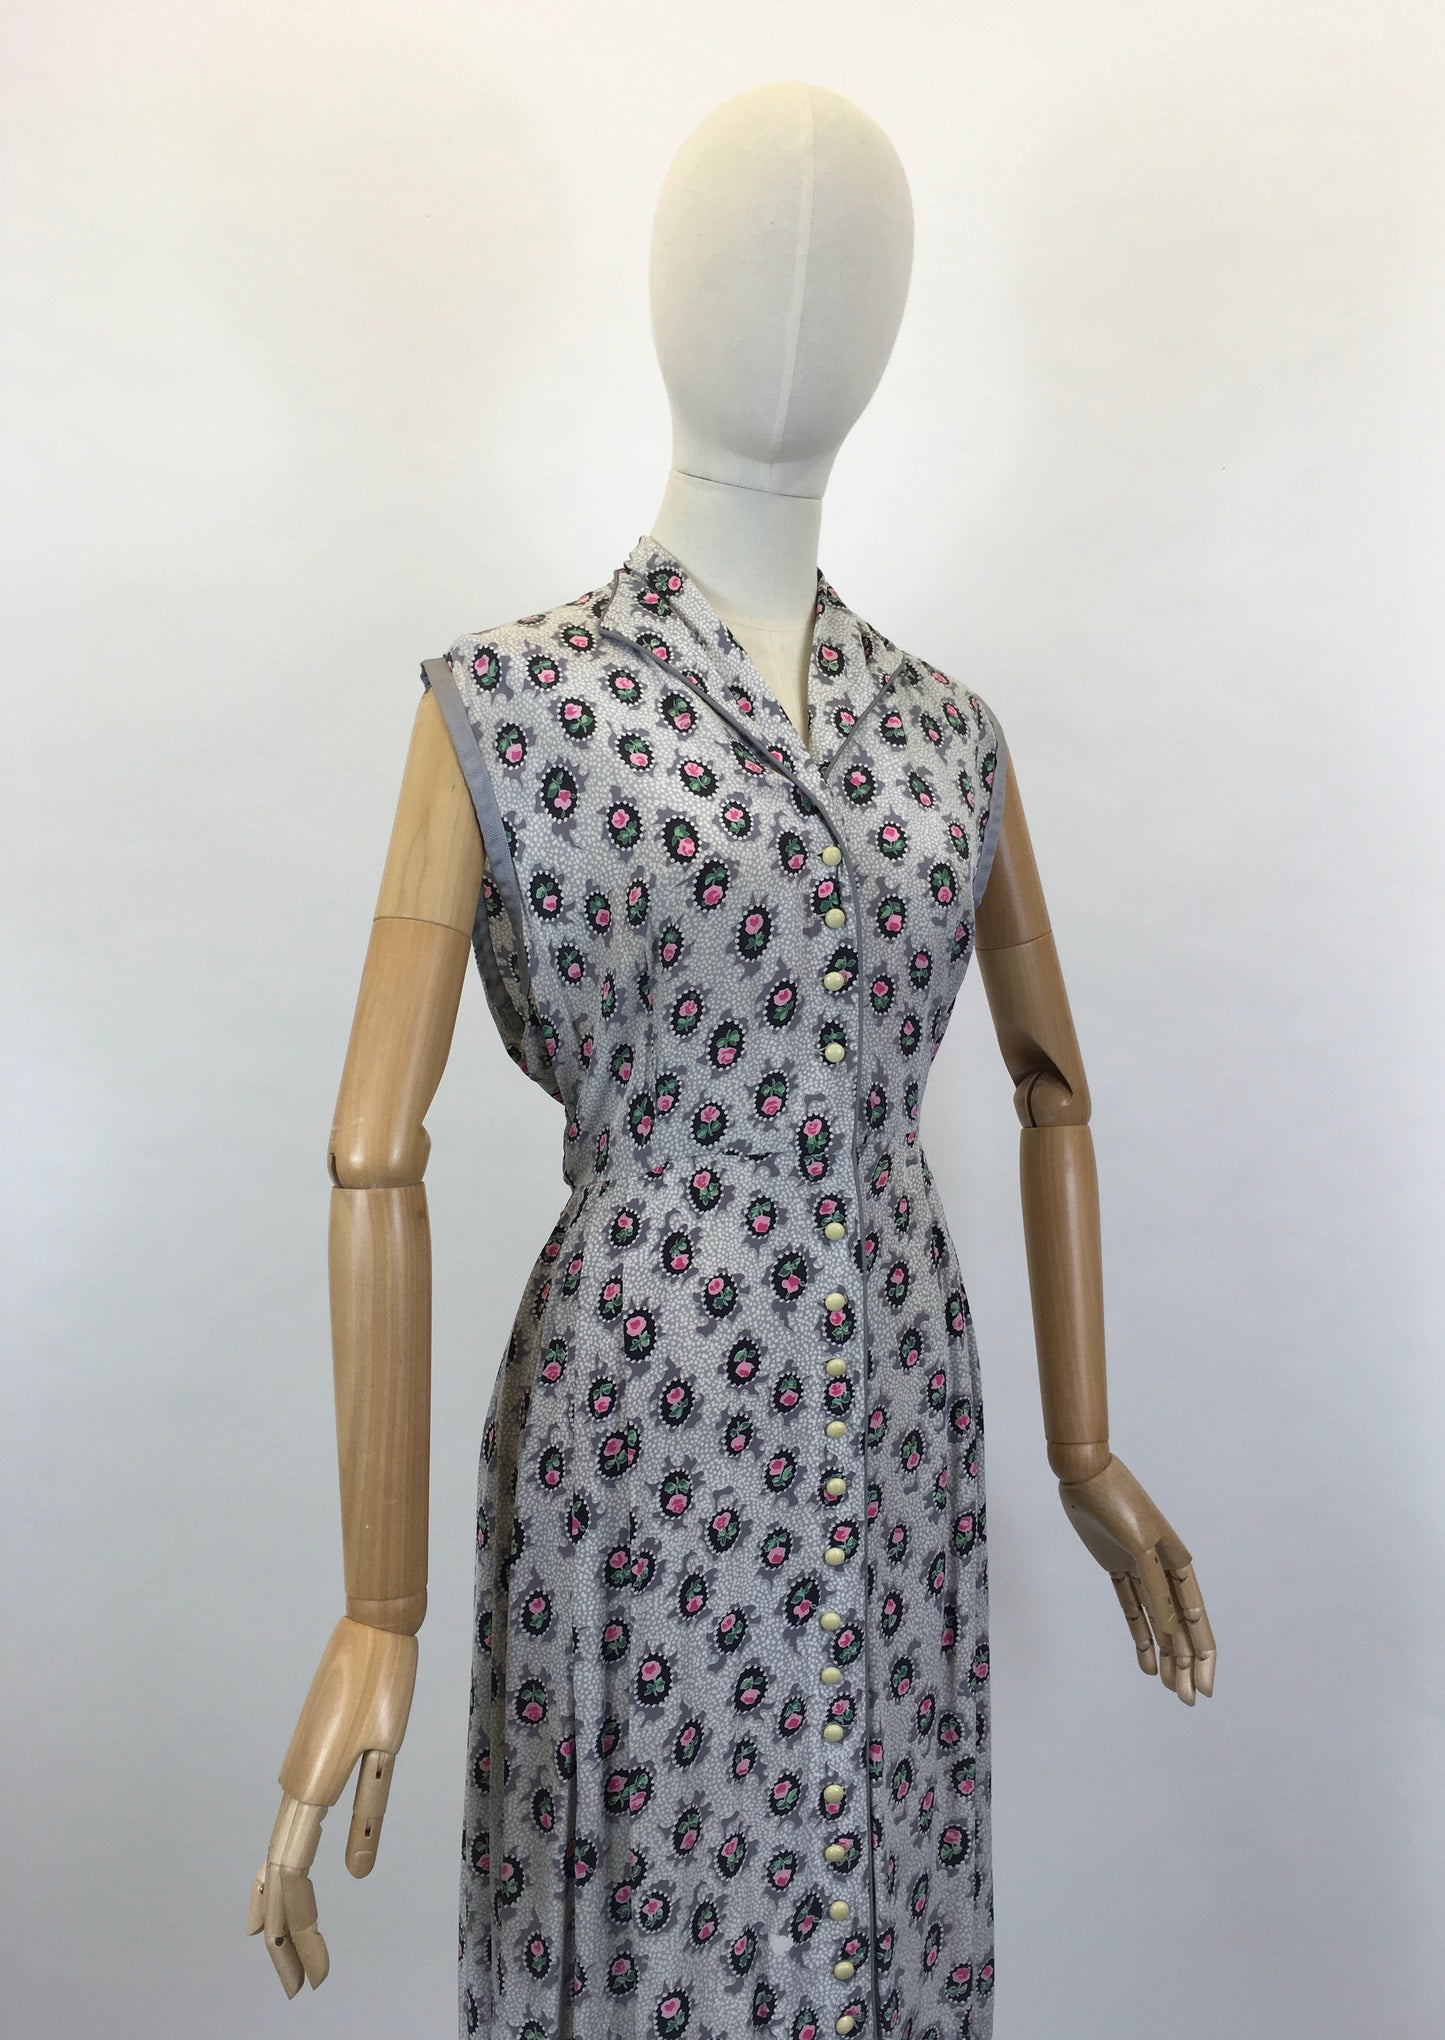 Original 1950’s Cute Button Front Dress - In A Lovely Pretty Cameo Floral